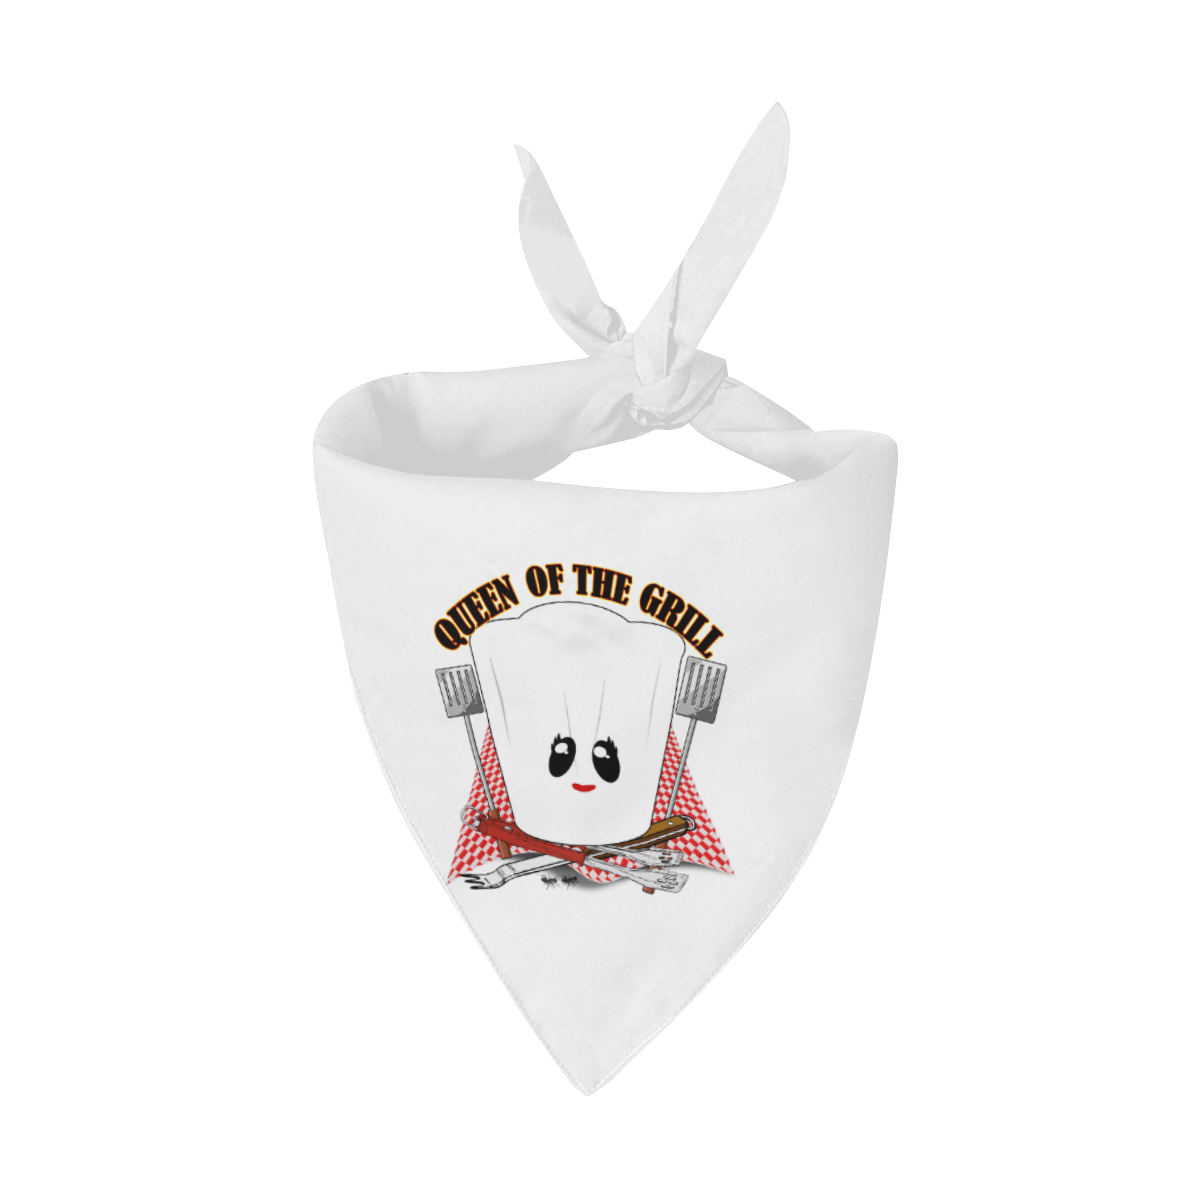 Queen of the Grill - Grill Master Pet Dog Bandana/Large Size